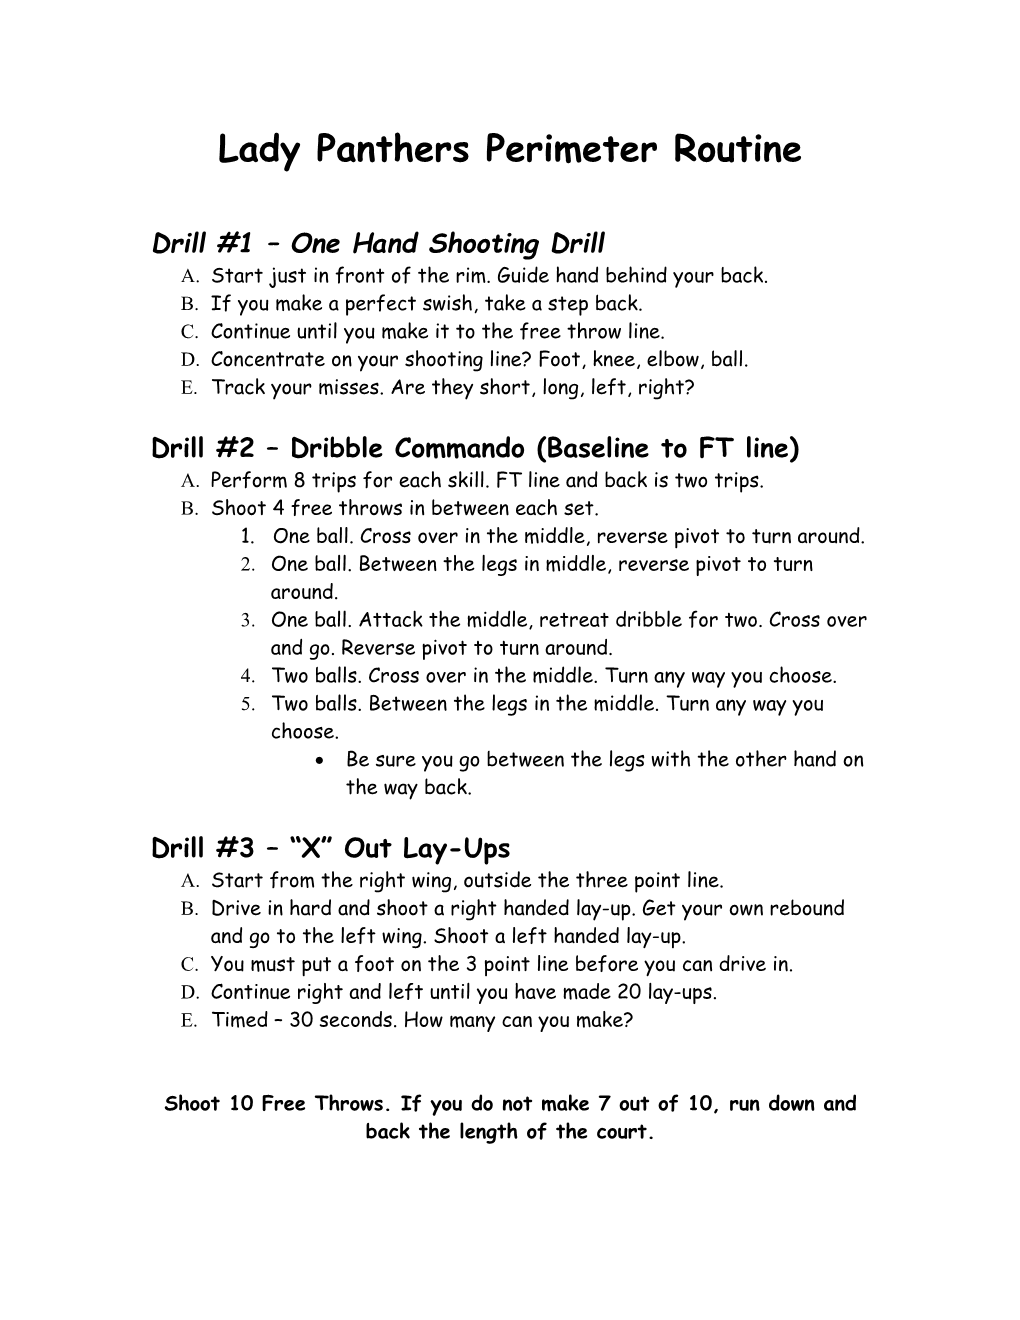 Lady Panther Open Gym Routine